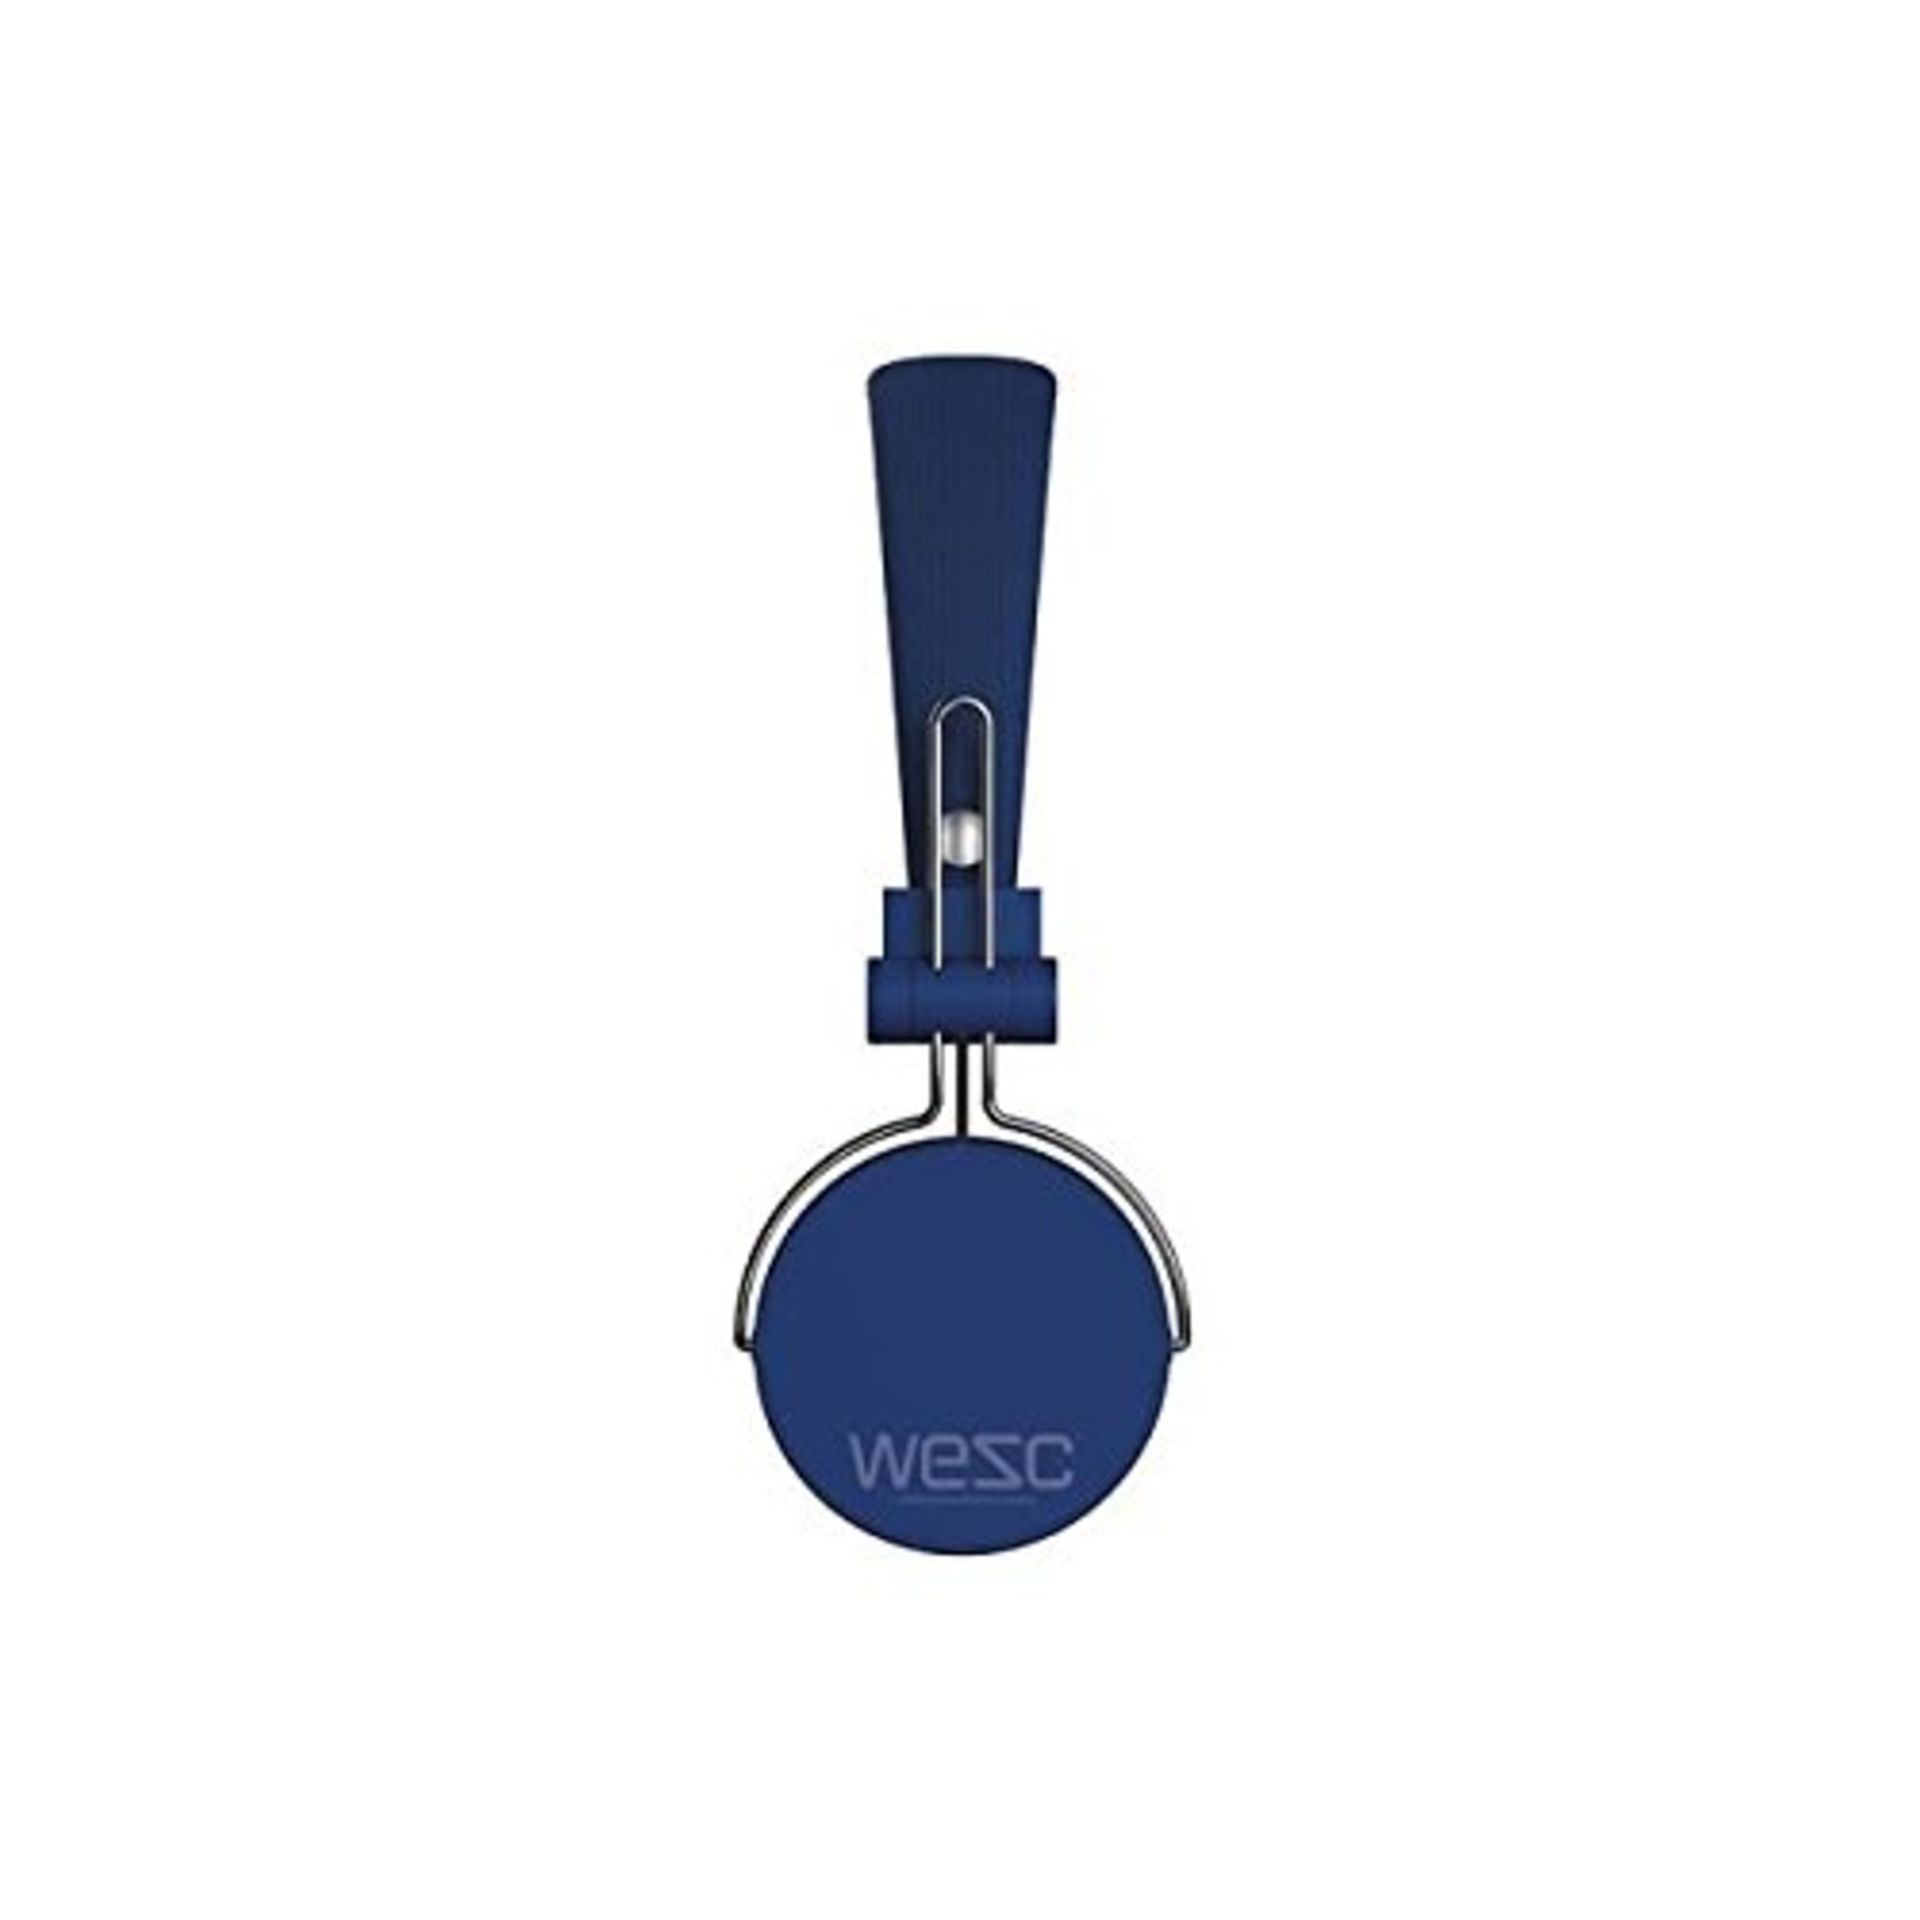 V *TRADE QTY* Brand New WESC M30 On-Ear Wired Headphones - 40mm Power Drivers - 3.5mm Gold Plated